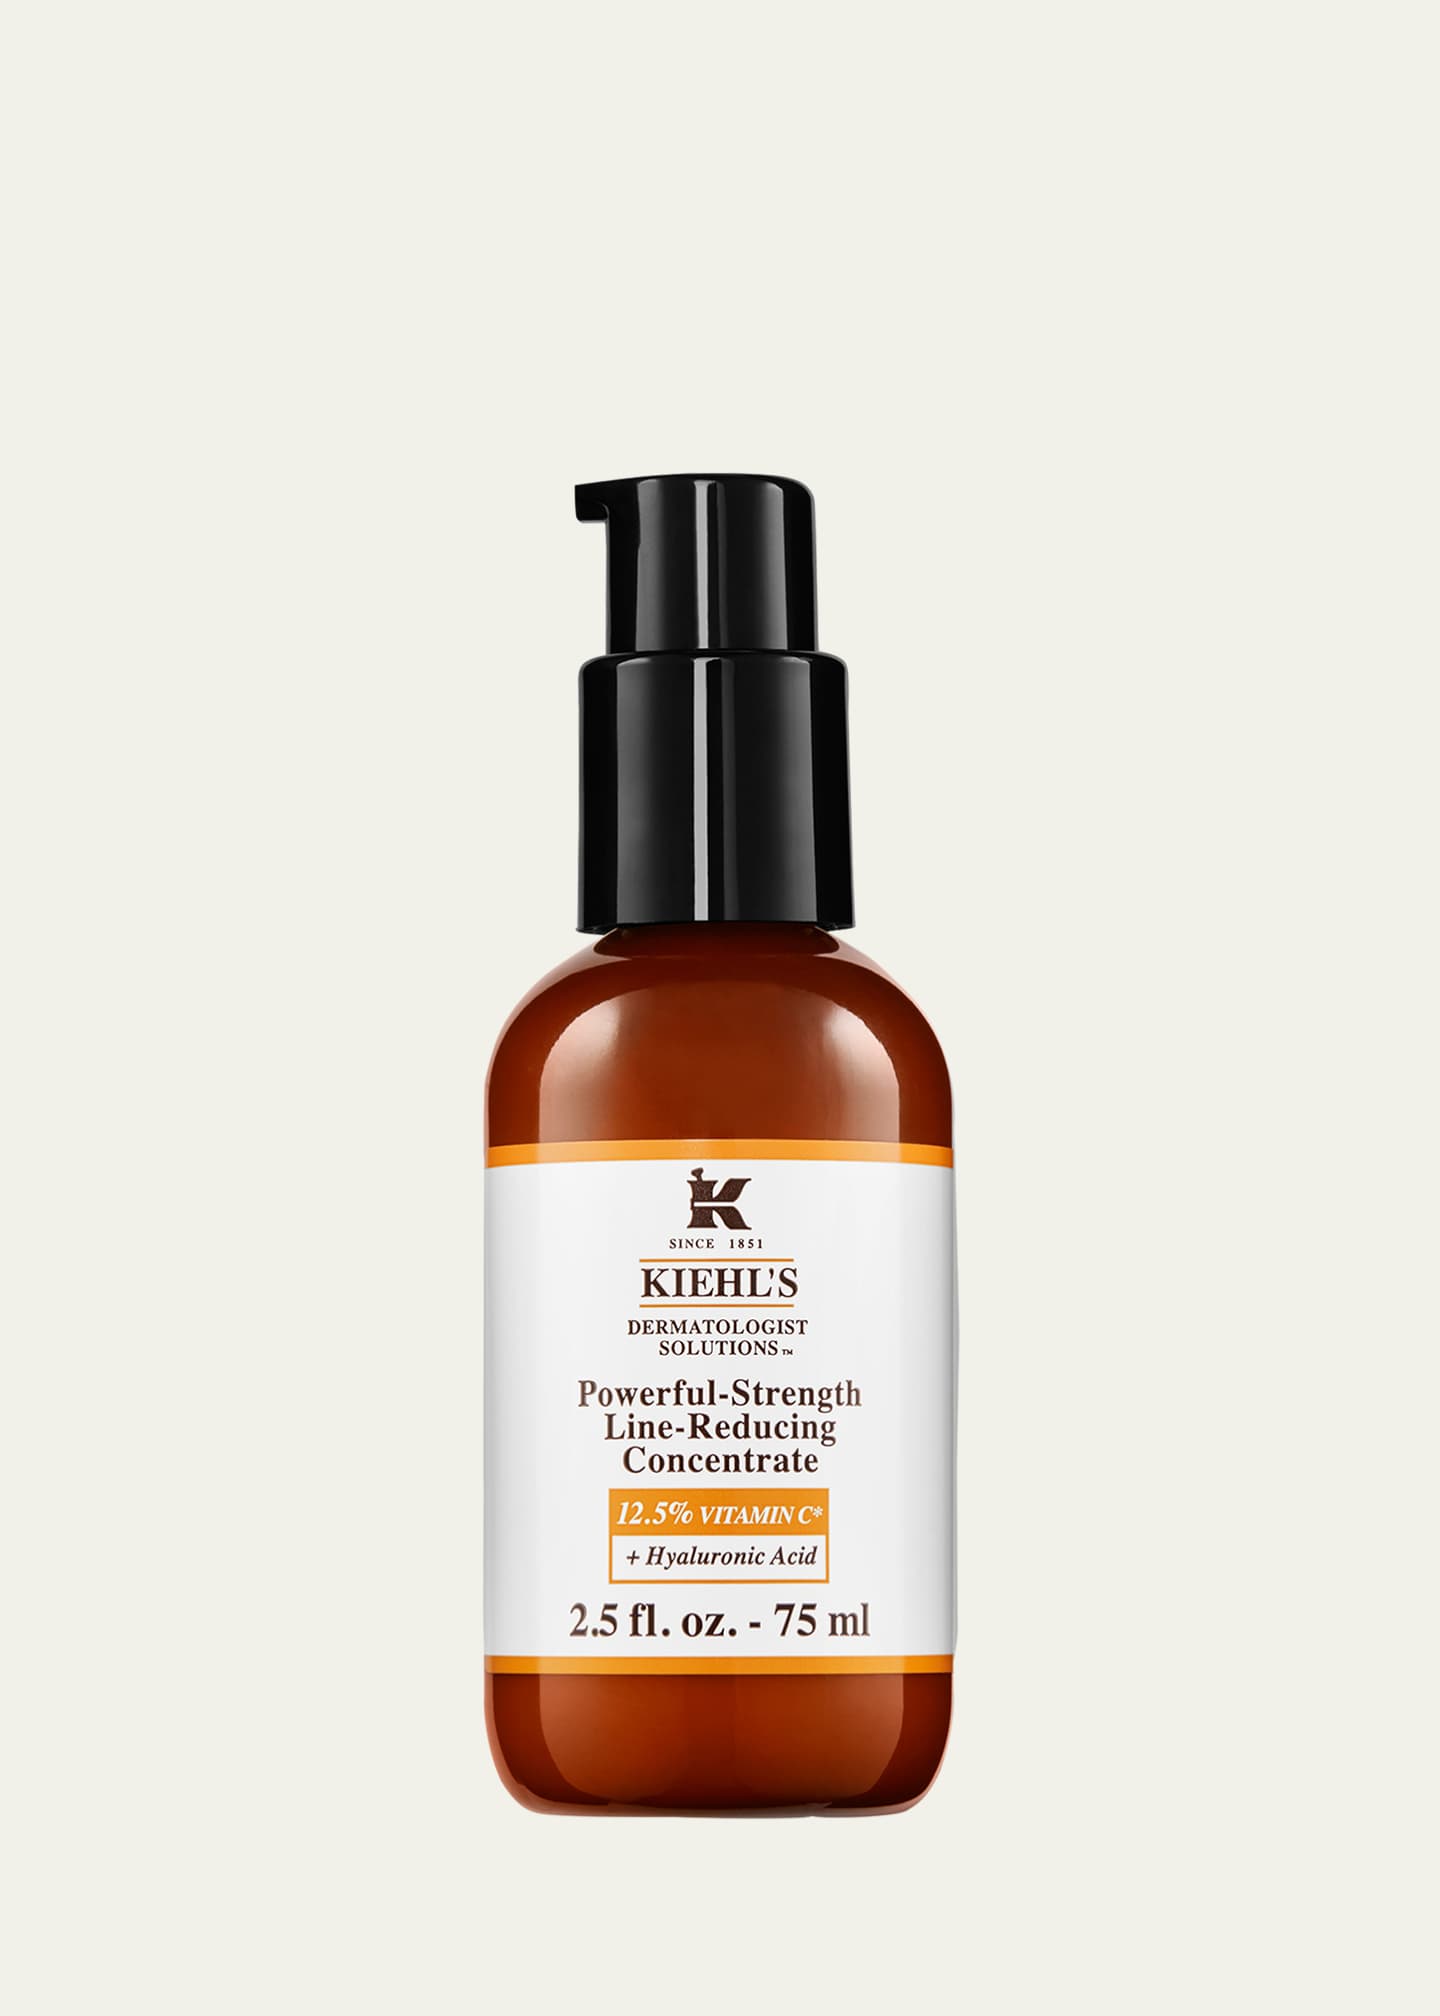 Kiehl's Since 1851 Powerful Strength Line Reducing Concentrate, 2.5 oz. Image 1 of 5